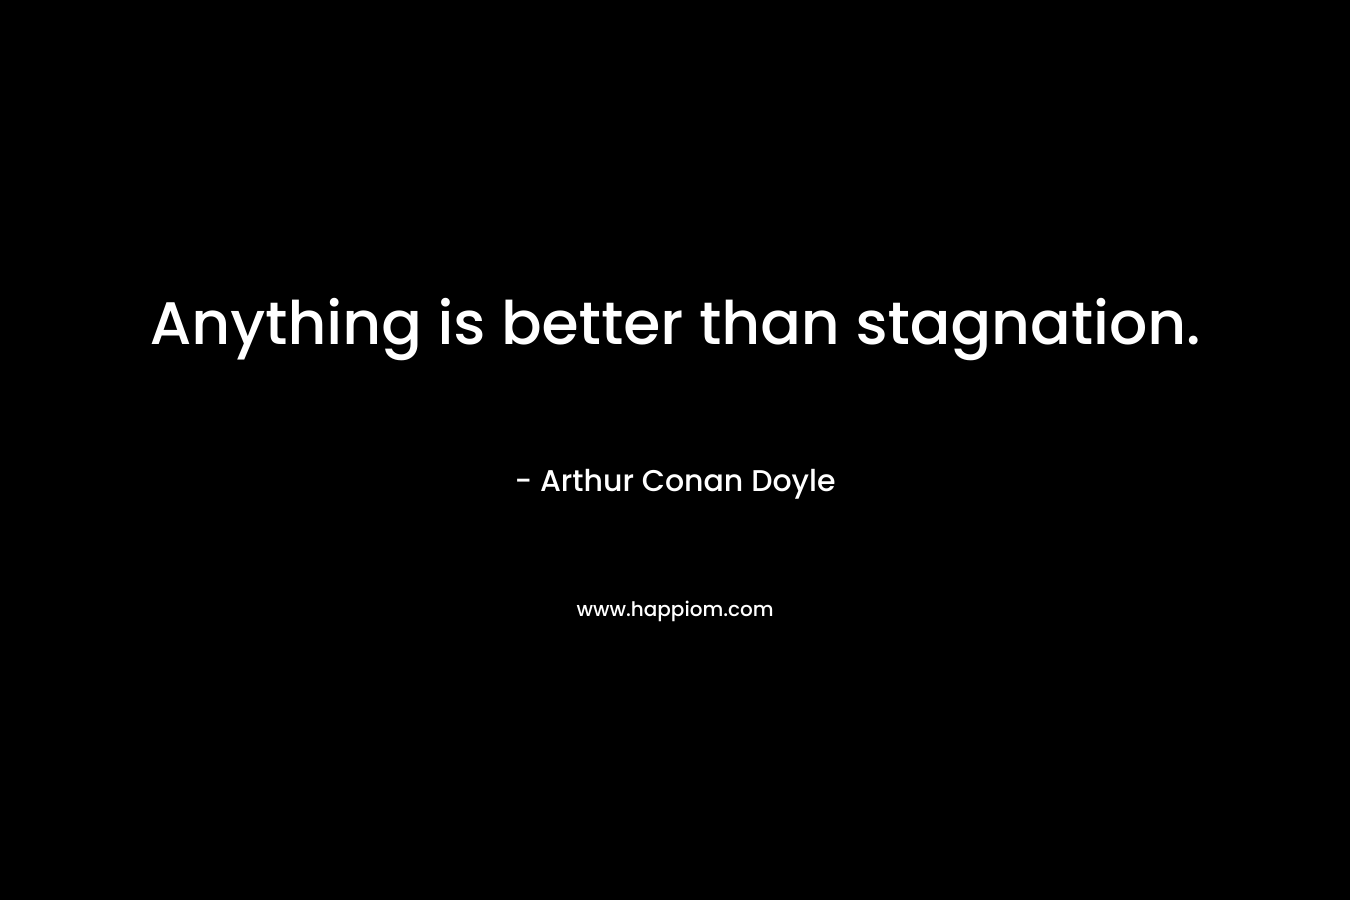 Anything is better than stagnation.